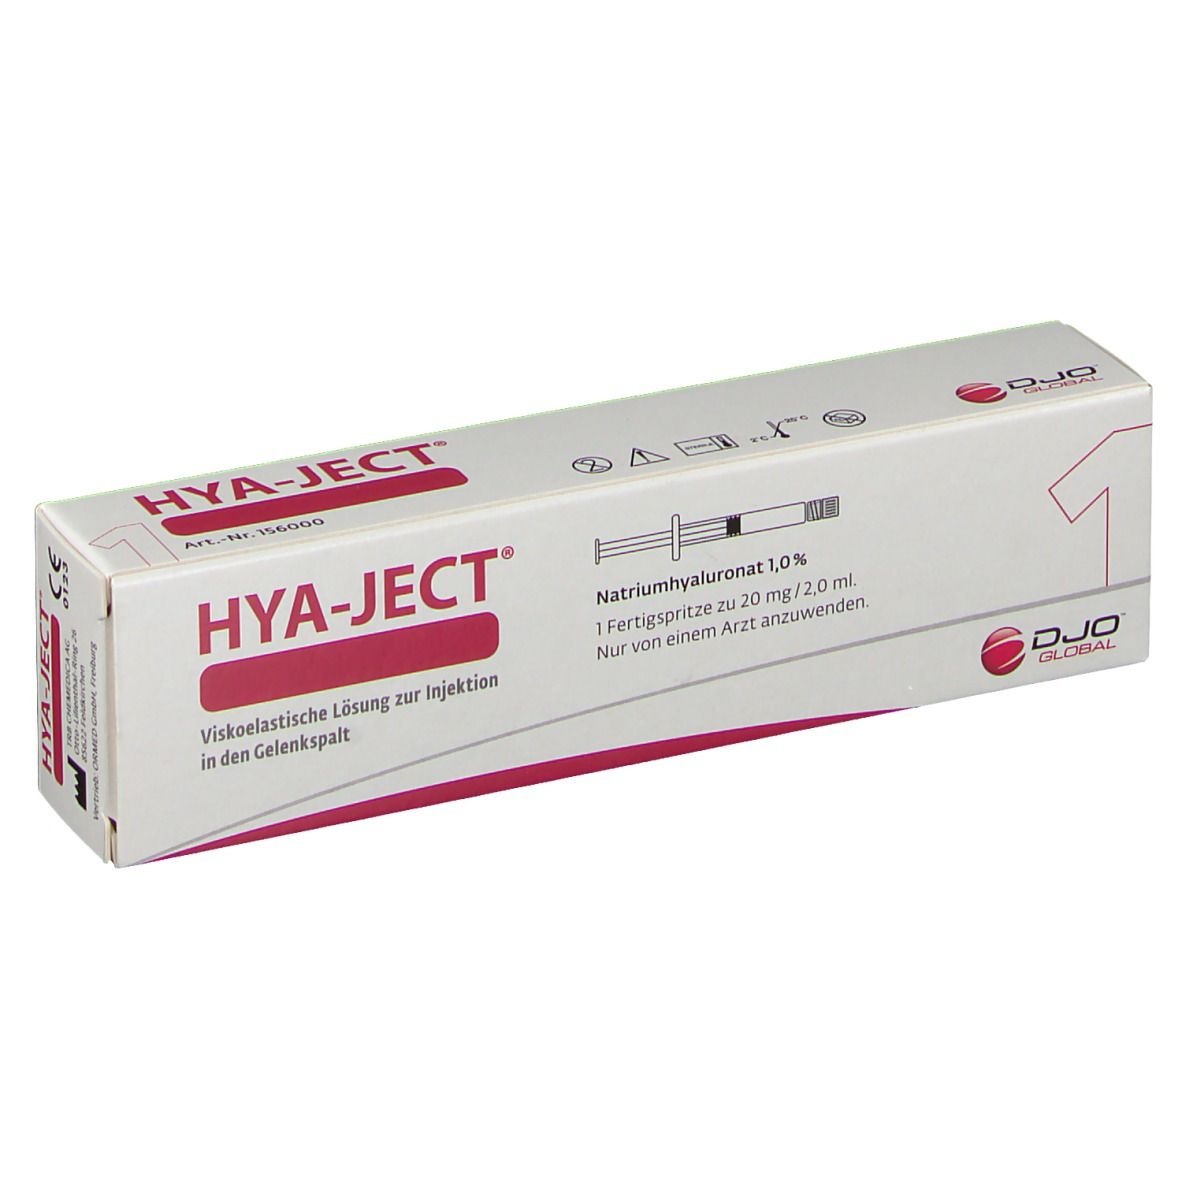 HYA-JECT®